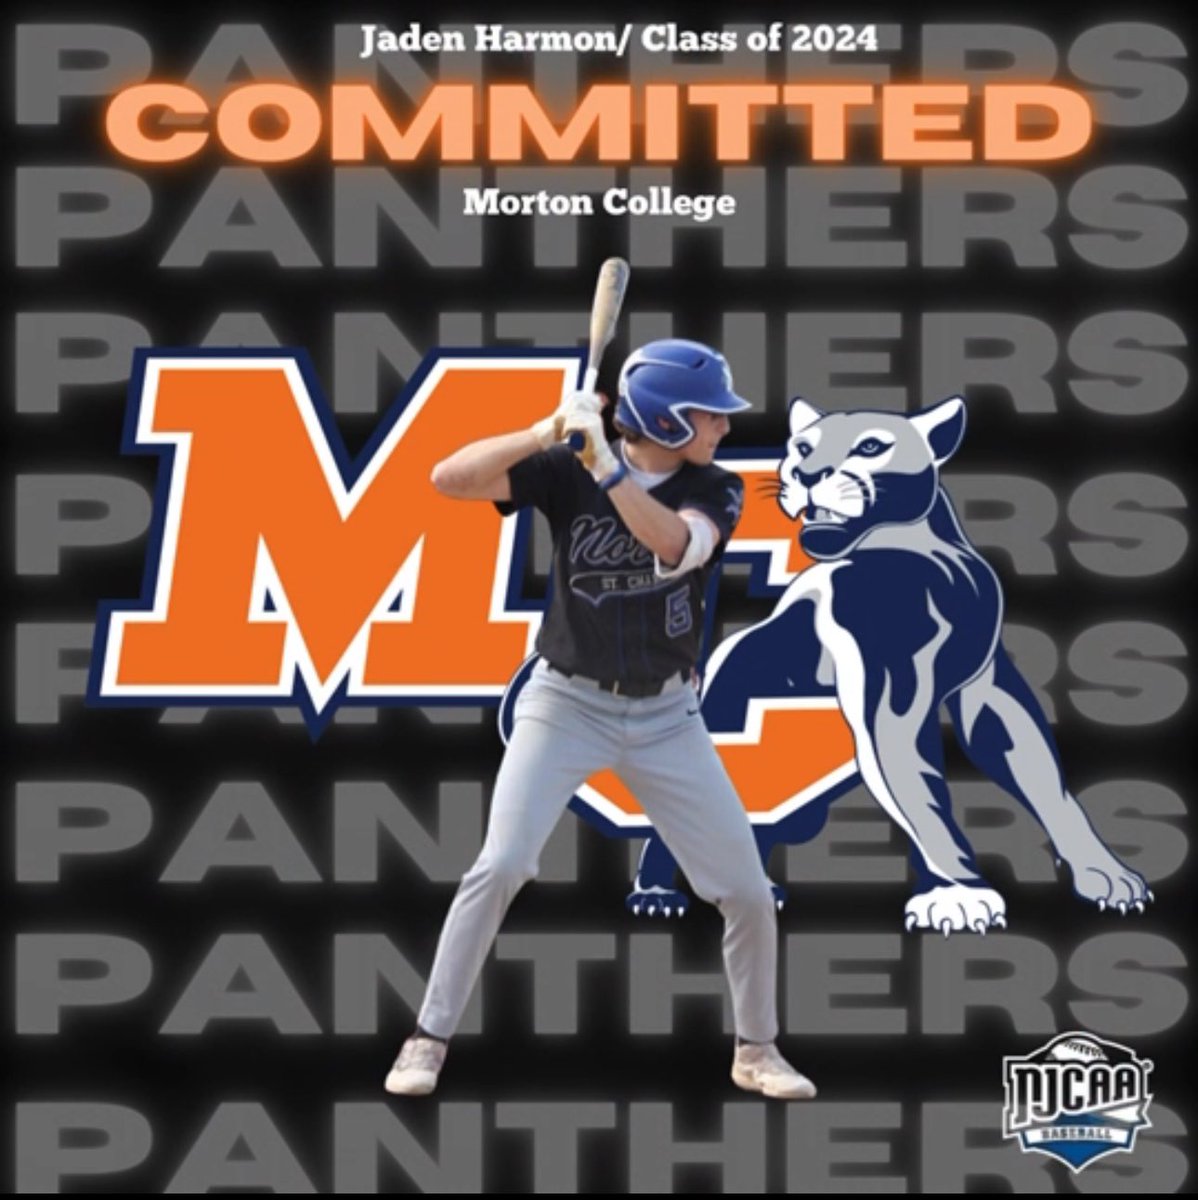 I’m excited to announce my commitment to further my academic and athletic career at Morton College. I would like to thank my family, friends and coaches that have helped me along the way. @MCPbaseball @CoachTG2 @CoachWik21 @PBRIllinois @canes_illinois @RodgerSouders